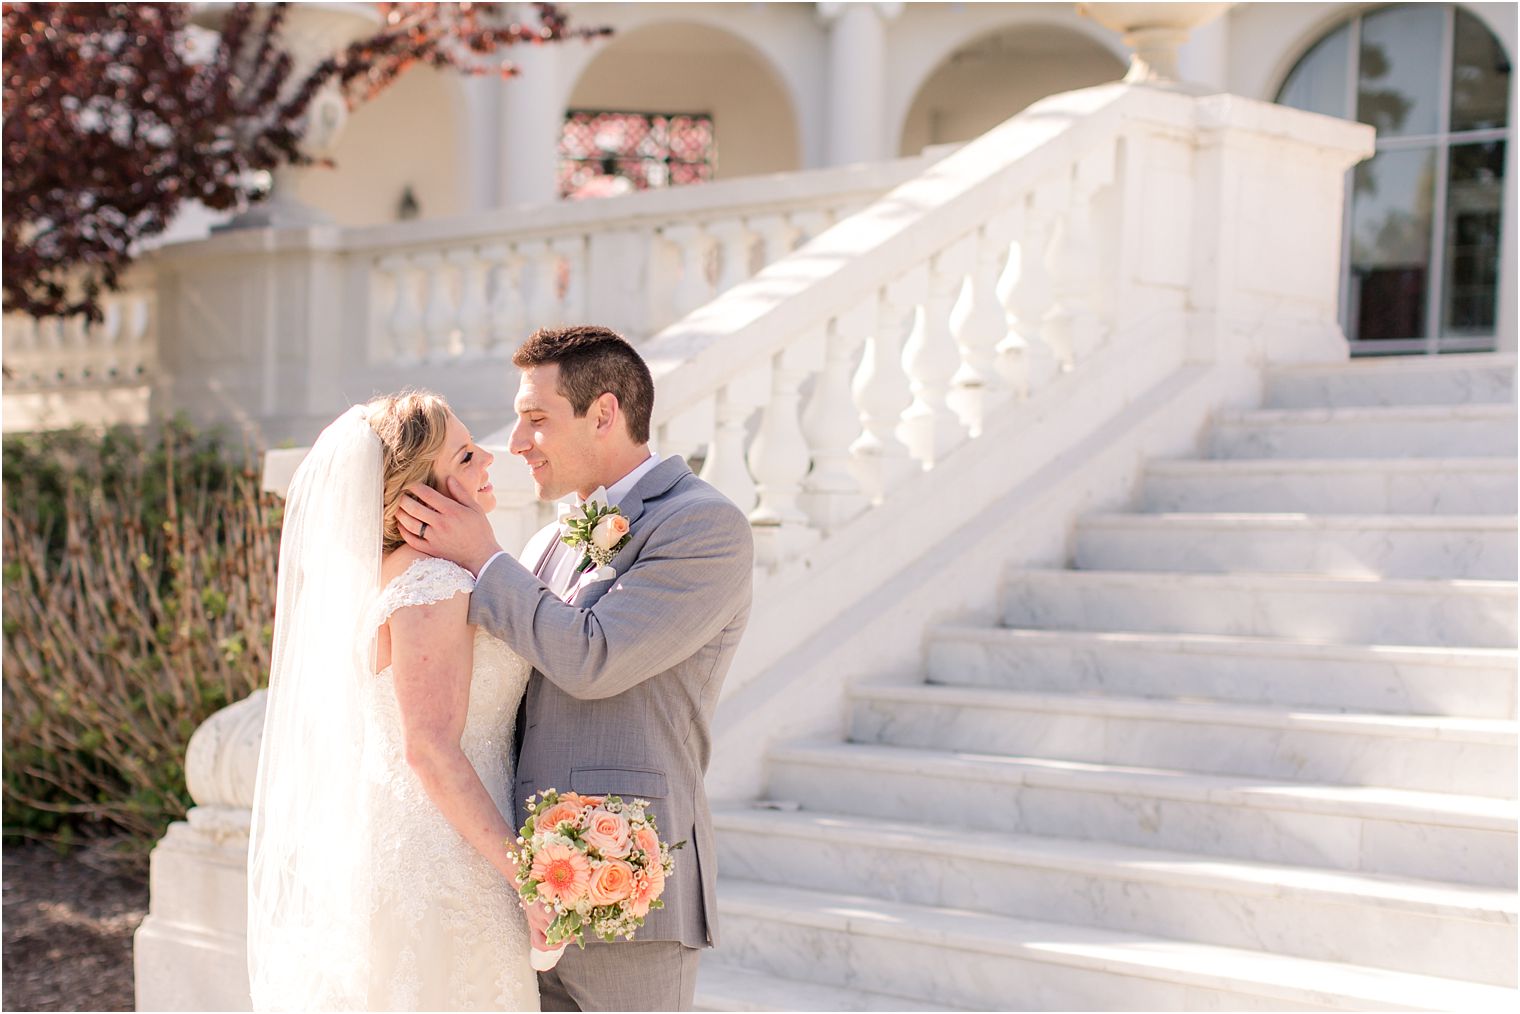 Bride and groom photo at Monmouth University